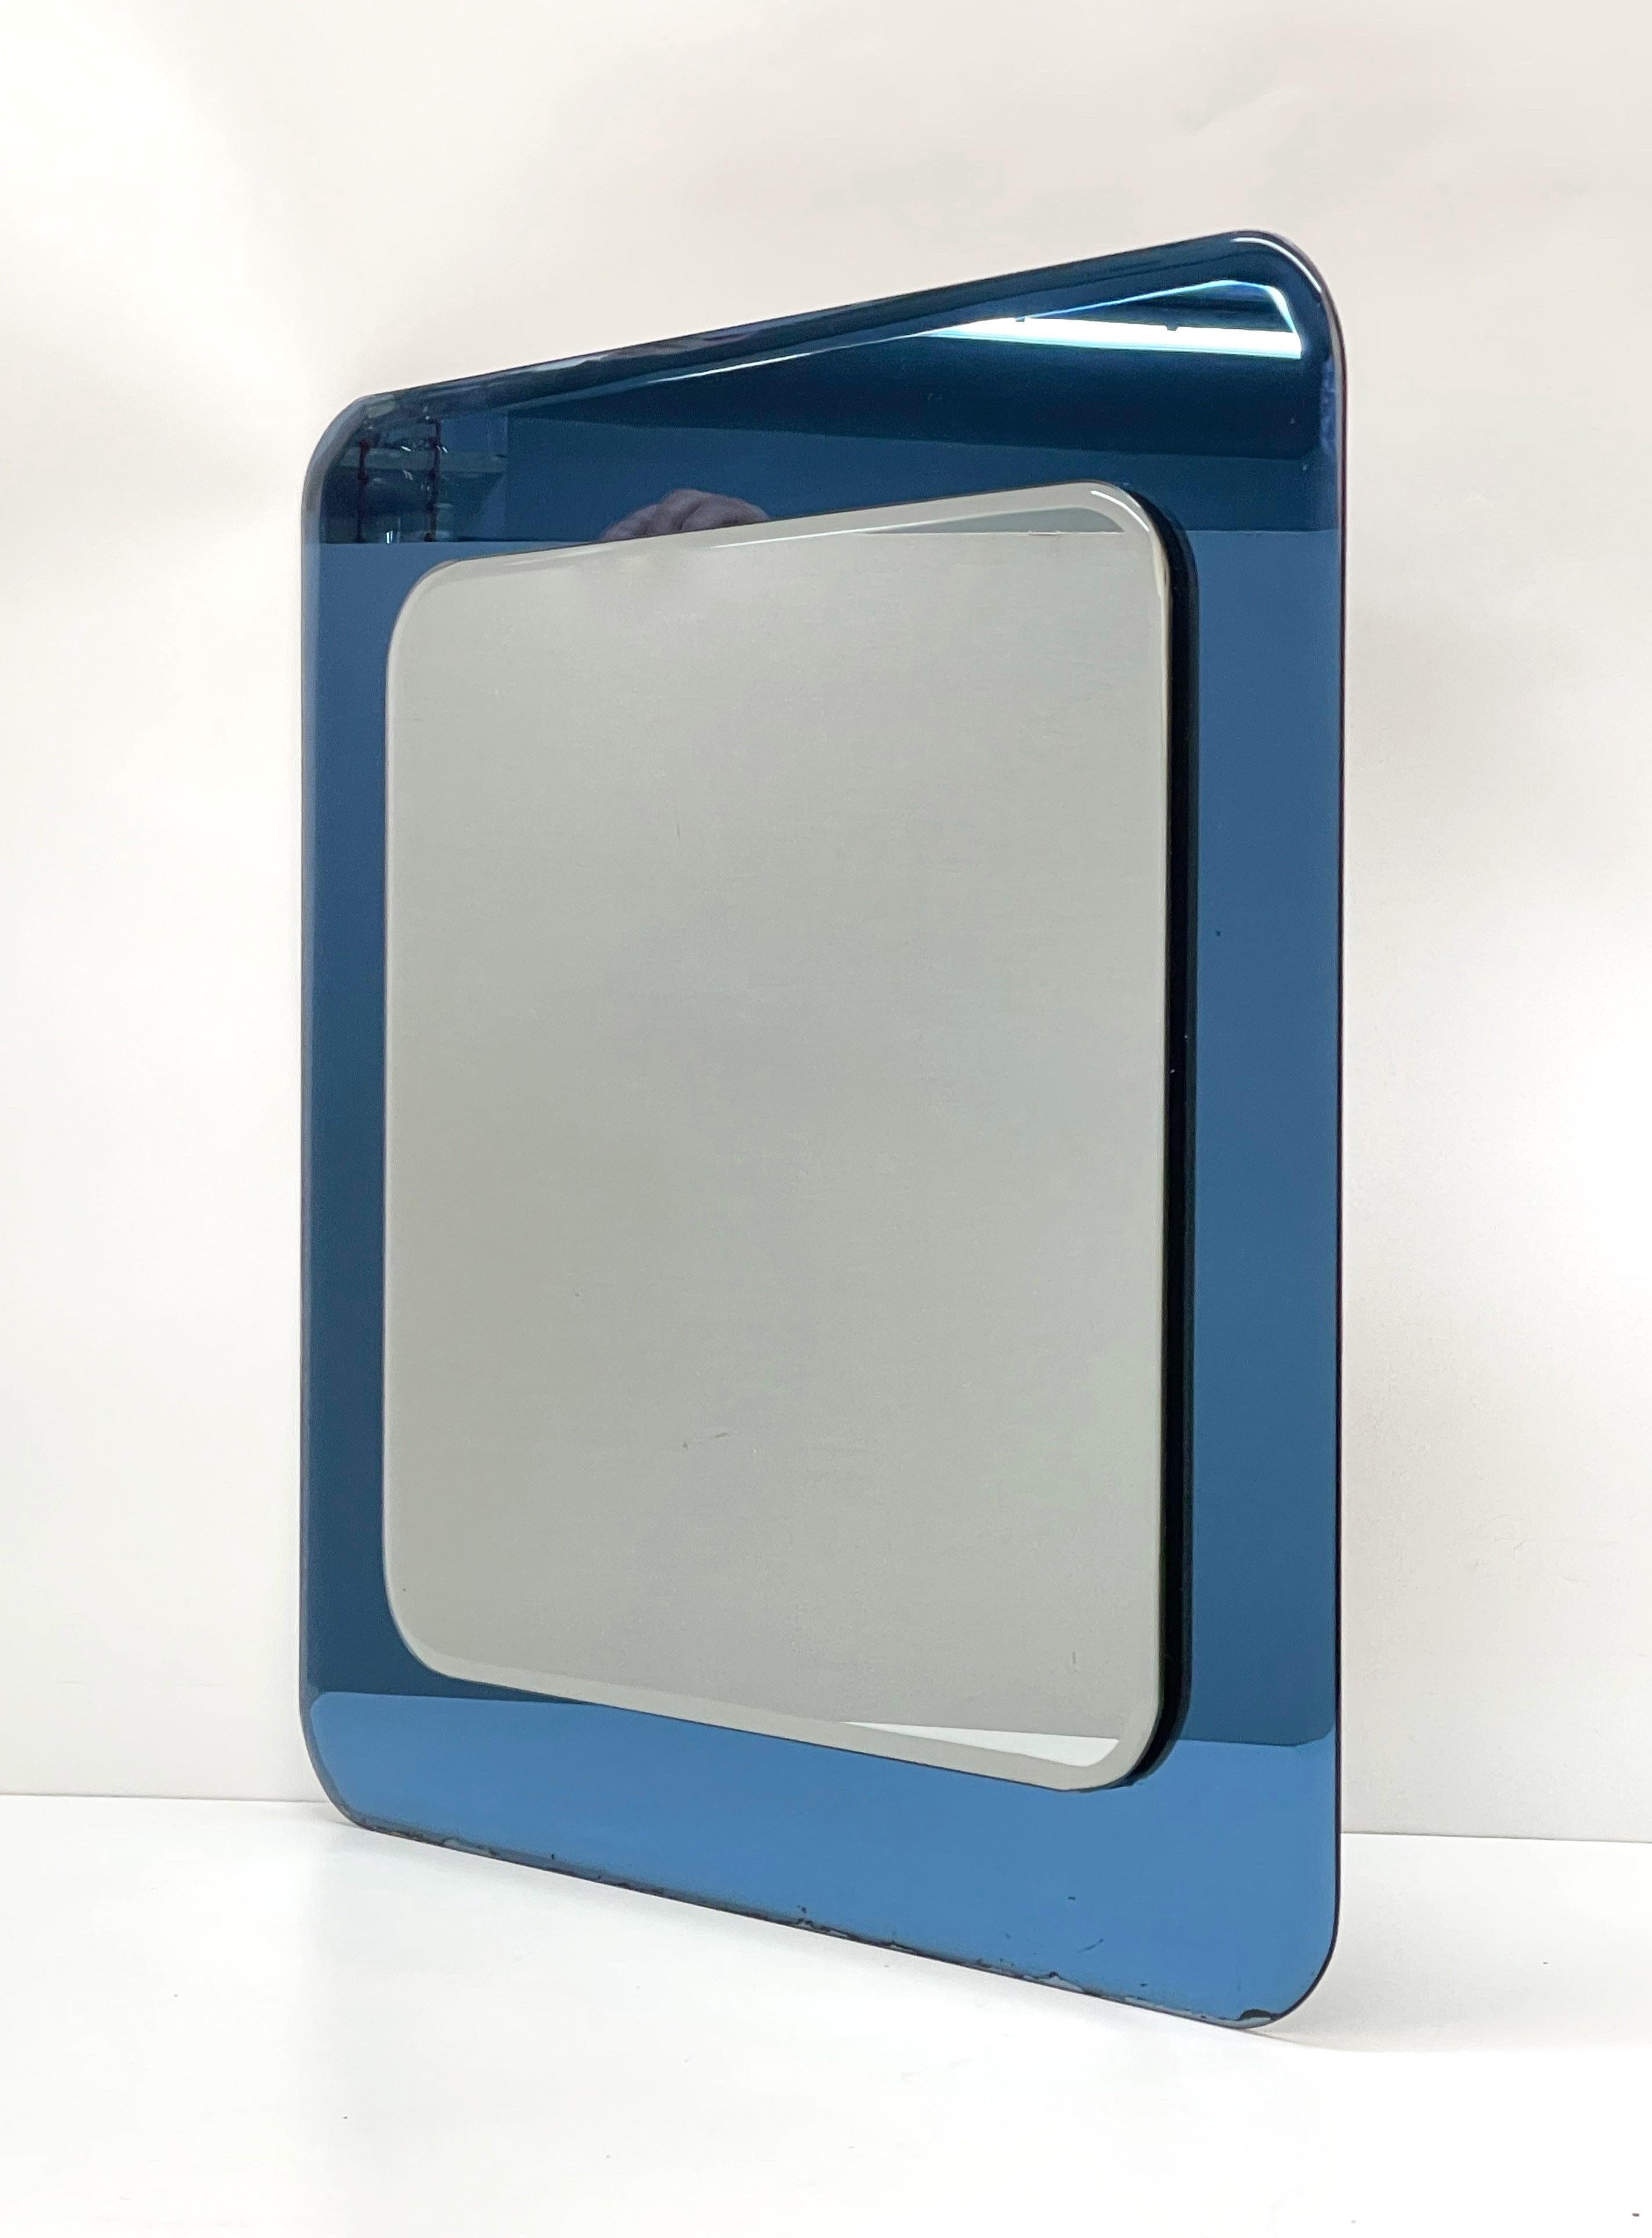 Midcentury Cristal Art Square Italian Wall Mirror with Blue Glass Frame, 1960s For Sale 4